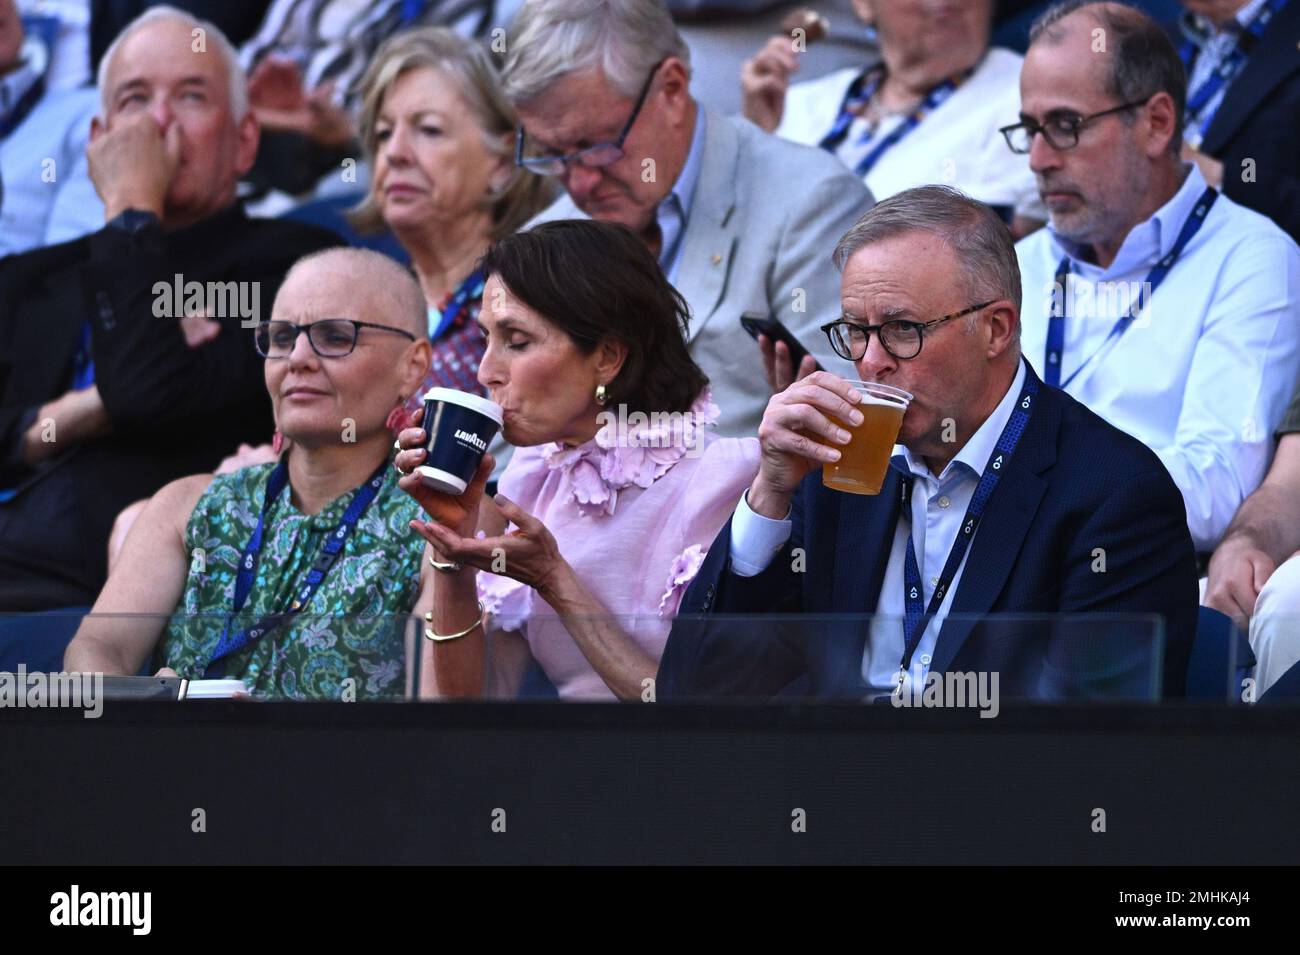 Prime Minister Anthony Albanese watches the Tommy Paul of the United States and Novak Djokovic of Serbia pose Mens semi final match at the 2023 Australian Open tennis championship at Melbourne Park